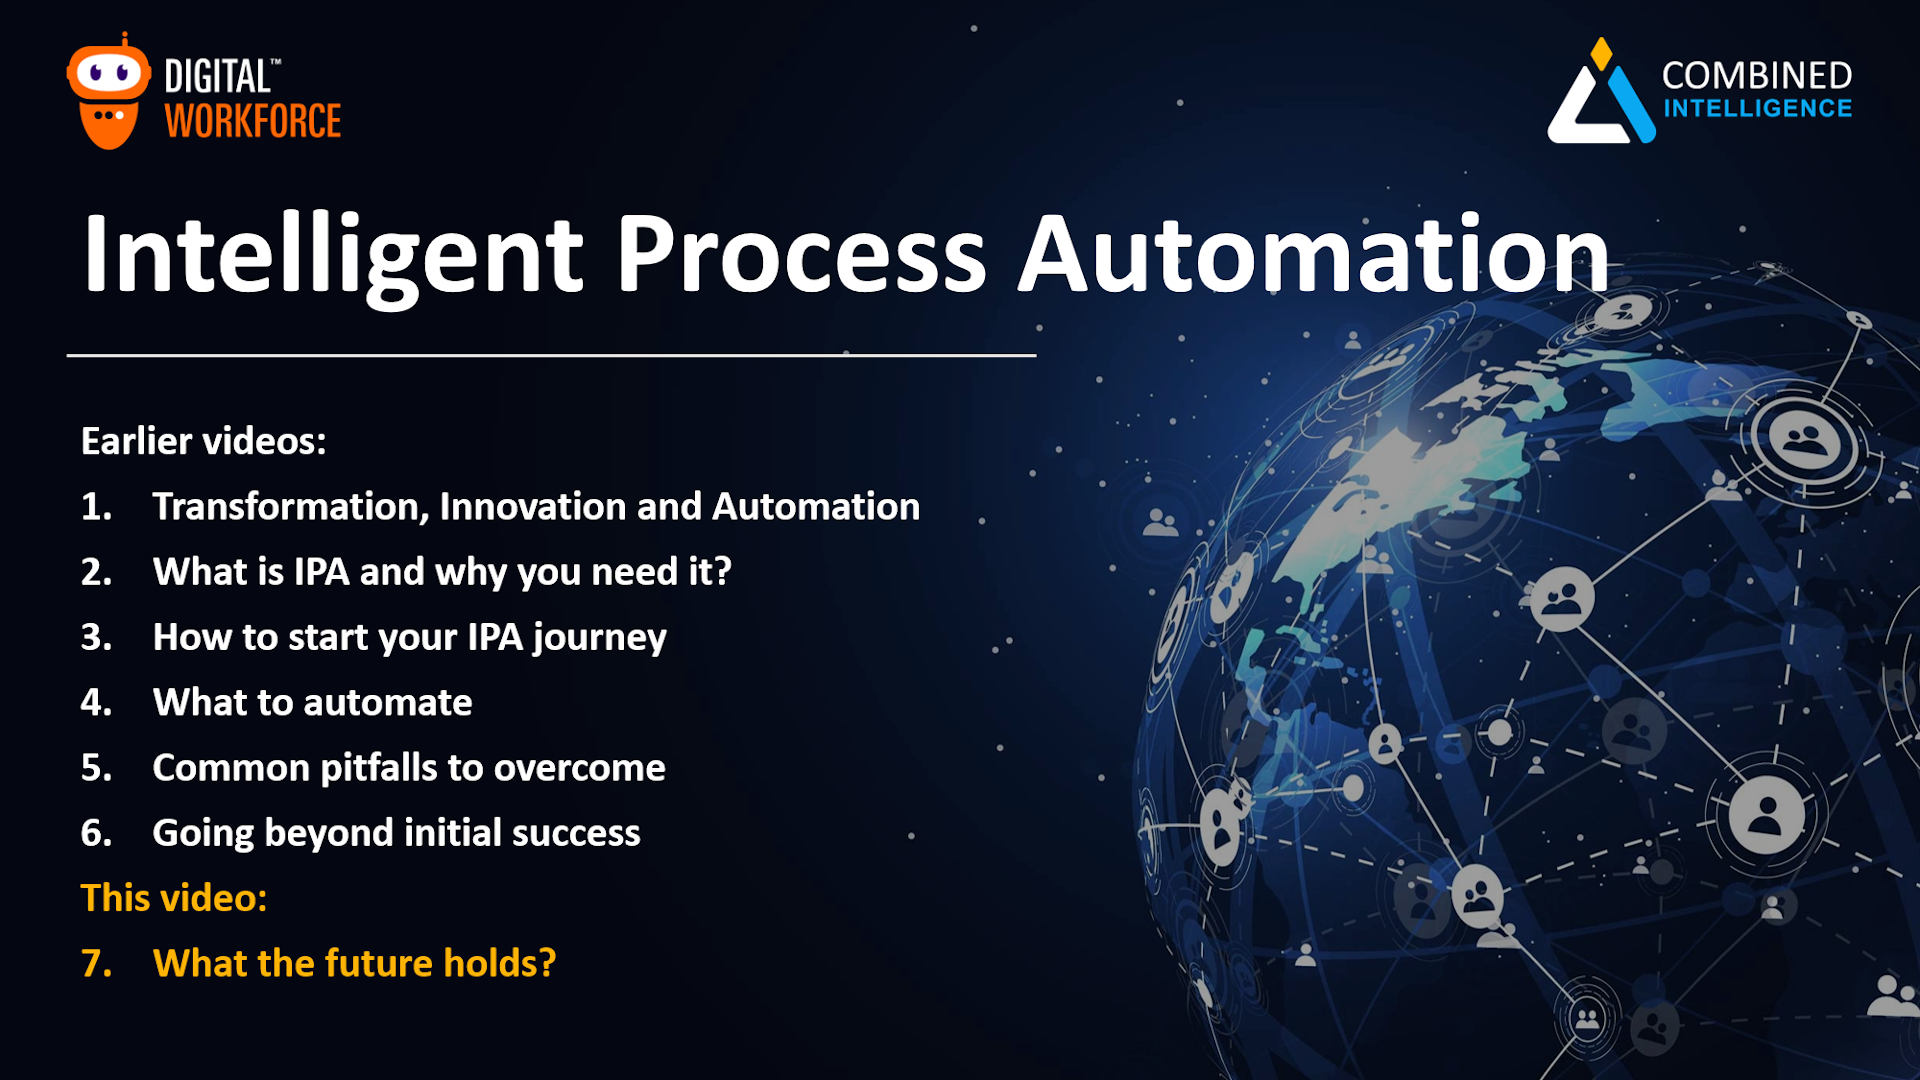 Intelligent Process Automation Video 7 – What the future holds?